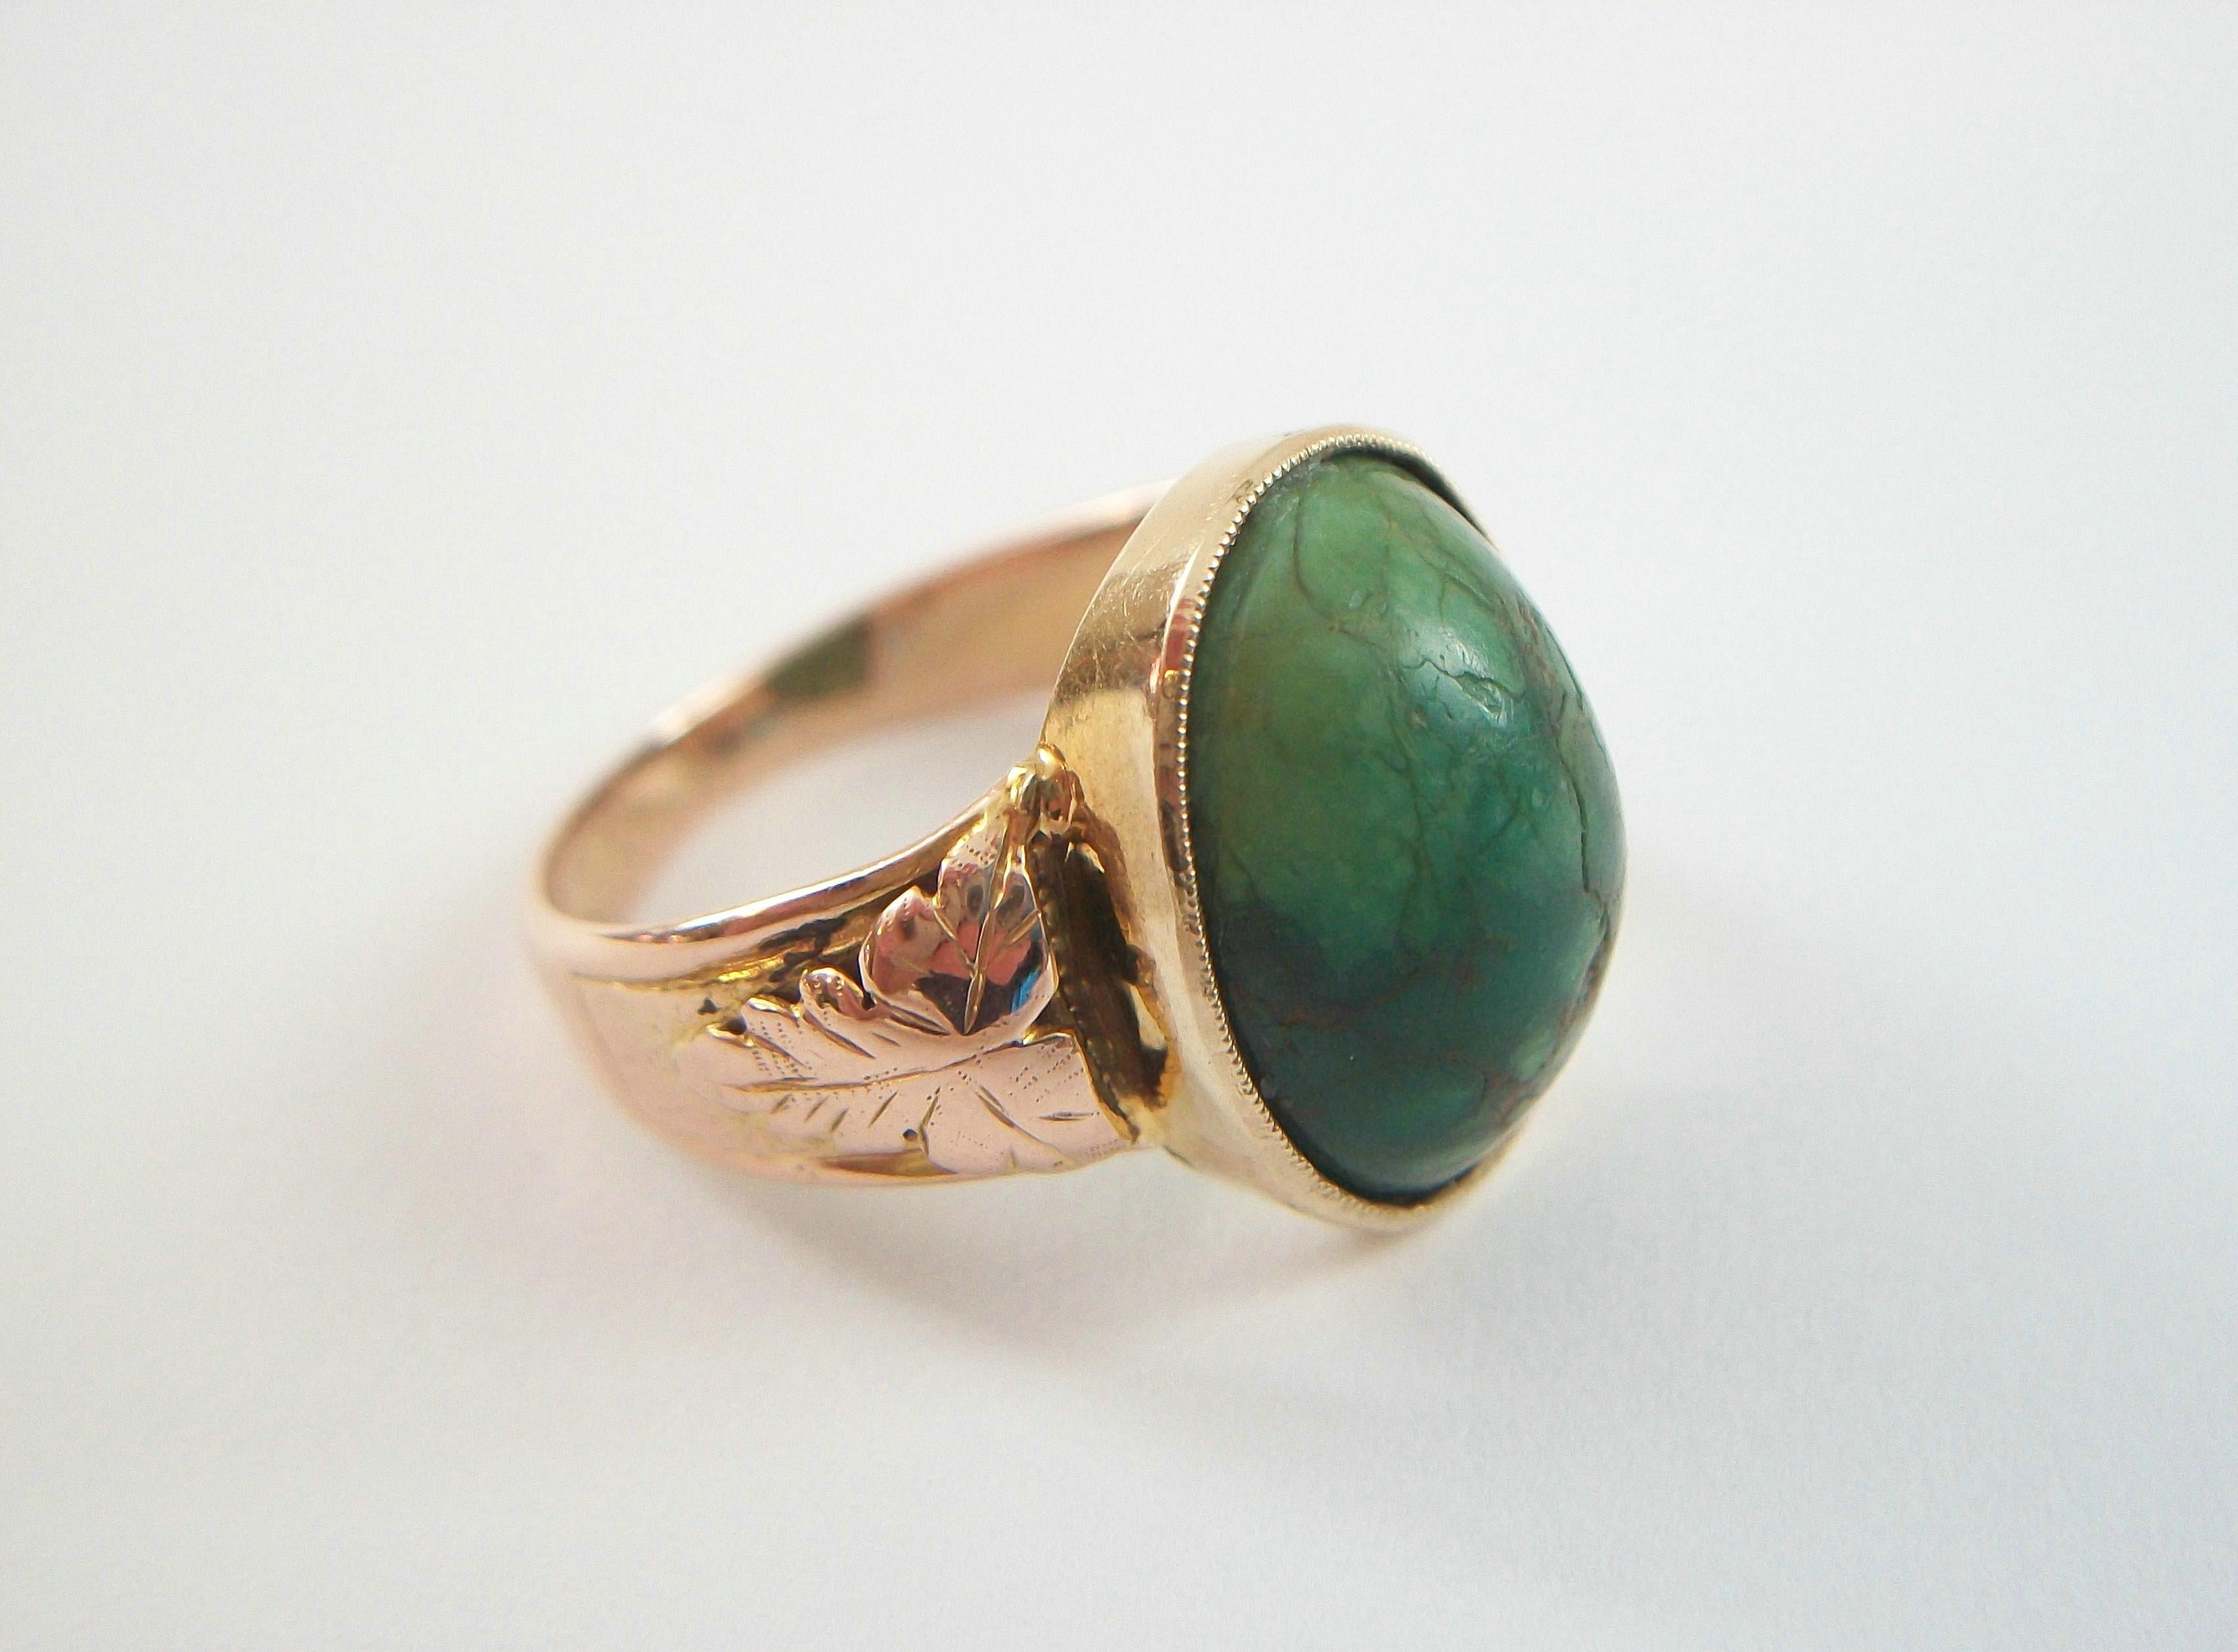 Women's or Men's Victorian Cabochon Turquoise & 18K Gold Ring - United Kingdom - Circa 1900 For Sale